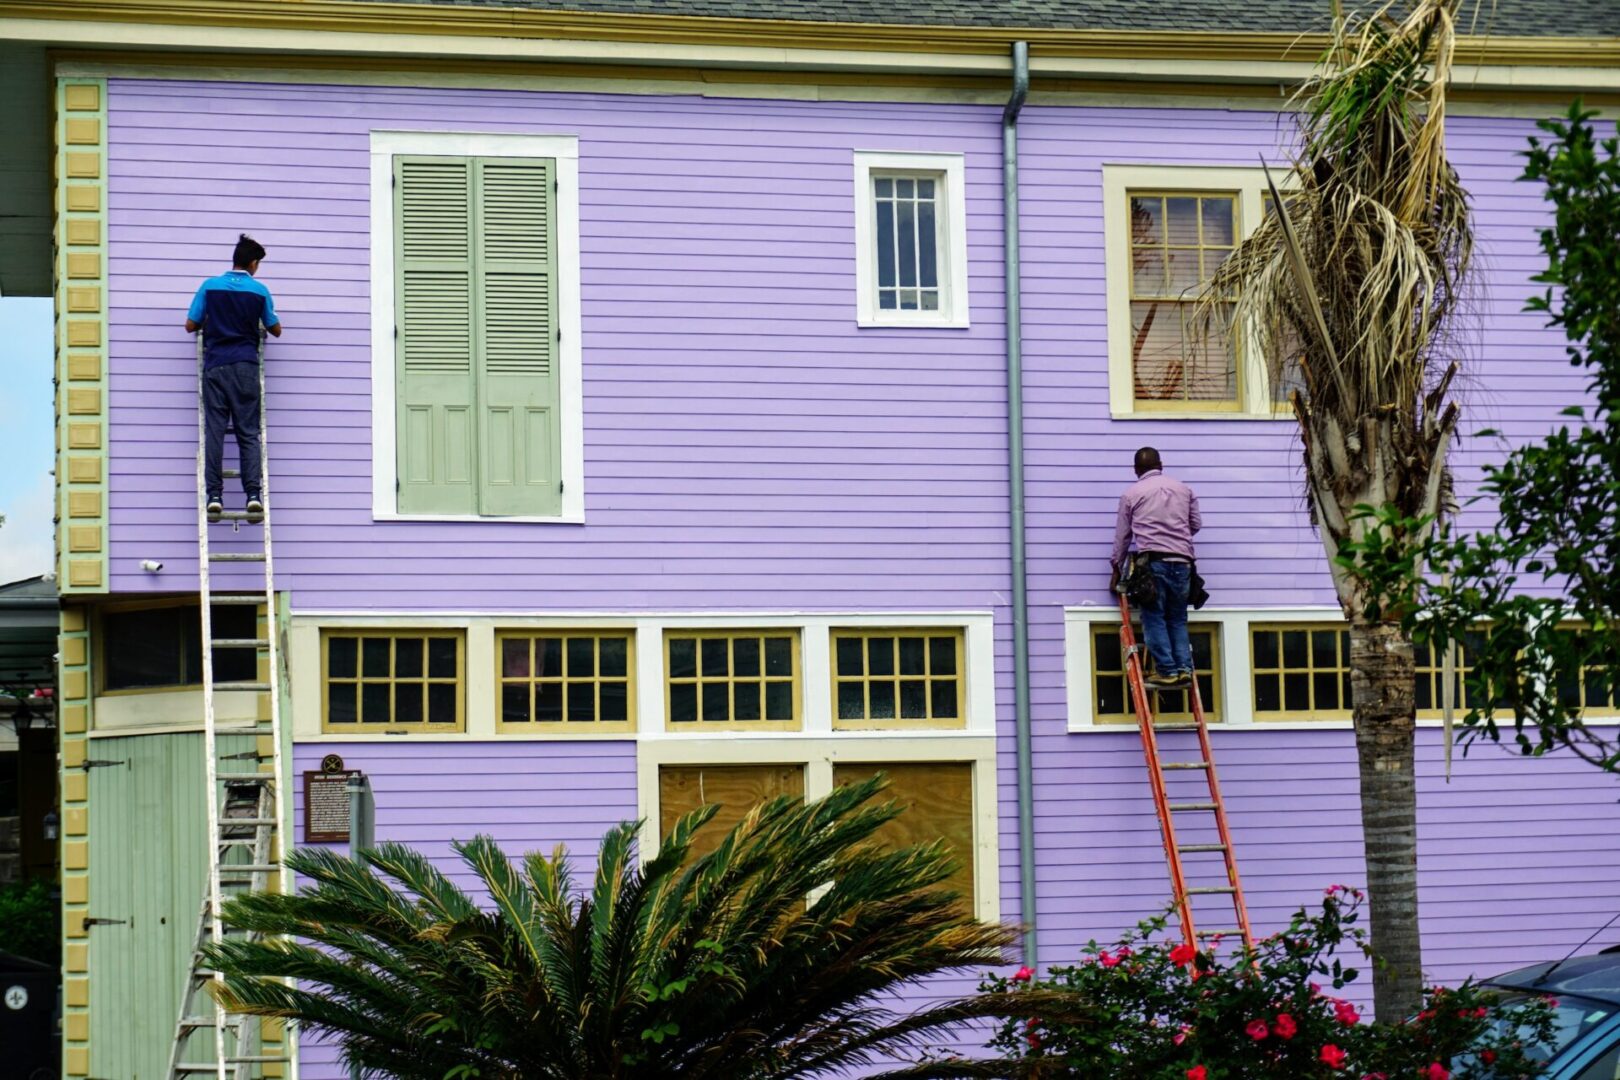 A man on a ladder painting the side of a house.